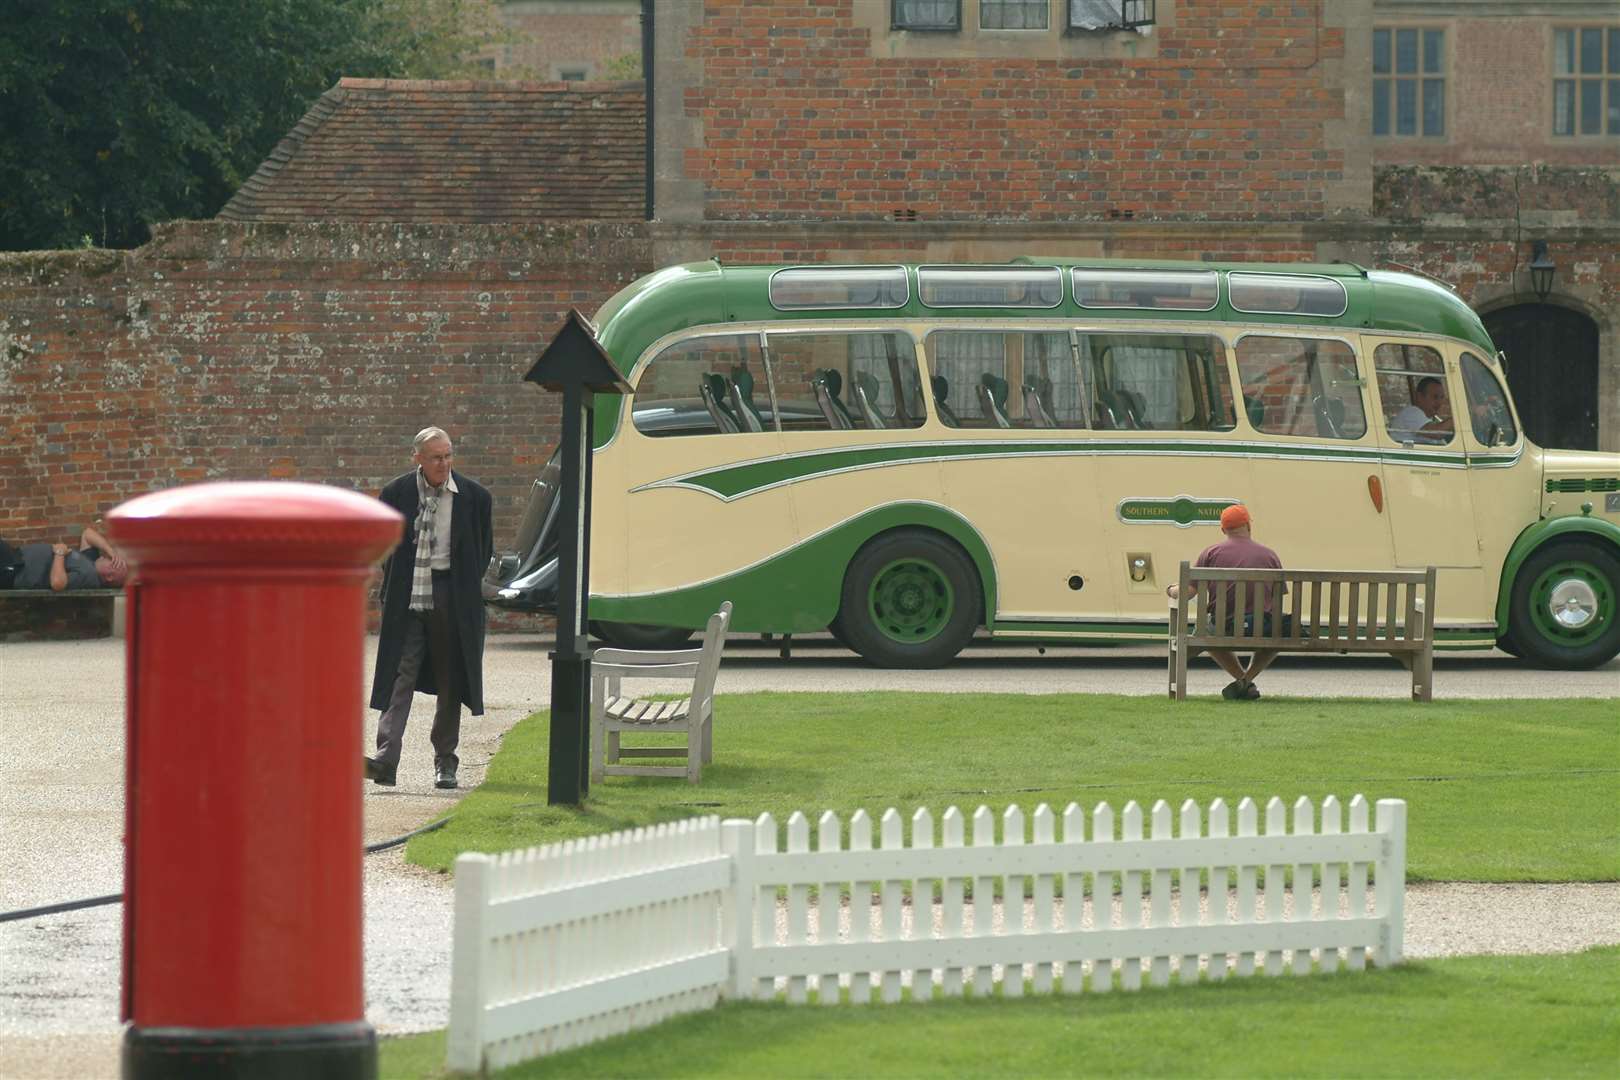 Filming of Miss Marple in Chilham Square - the square has been covered with turf to resemble a village green